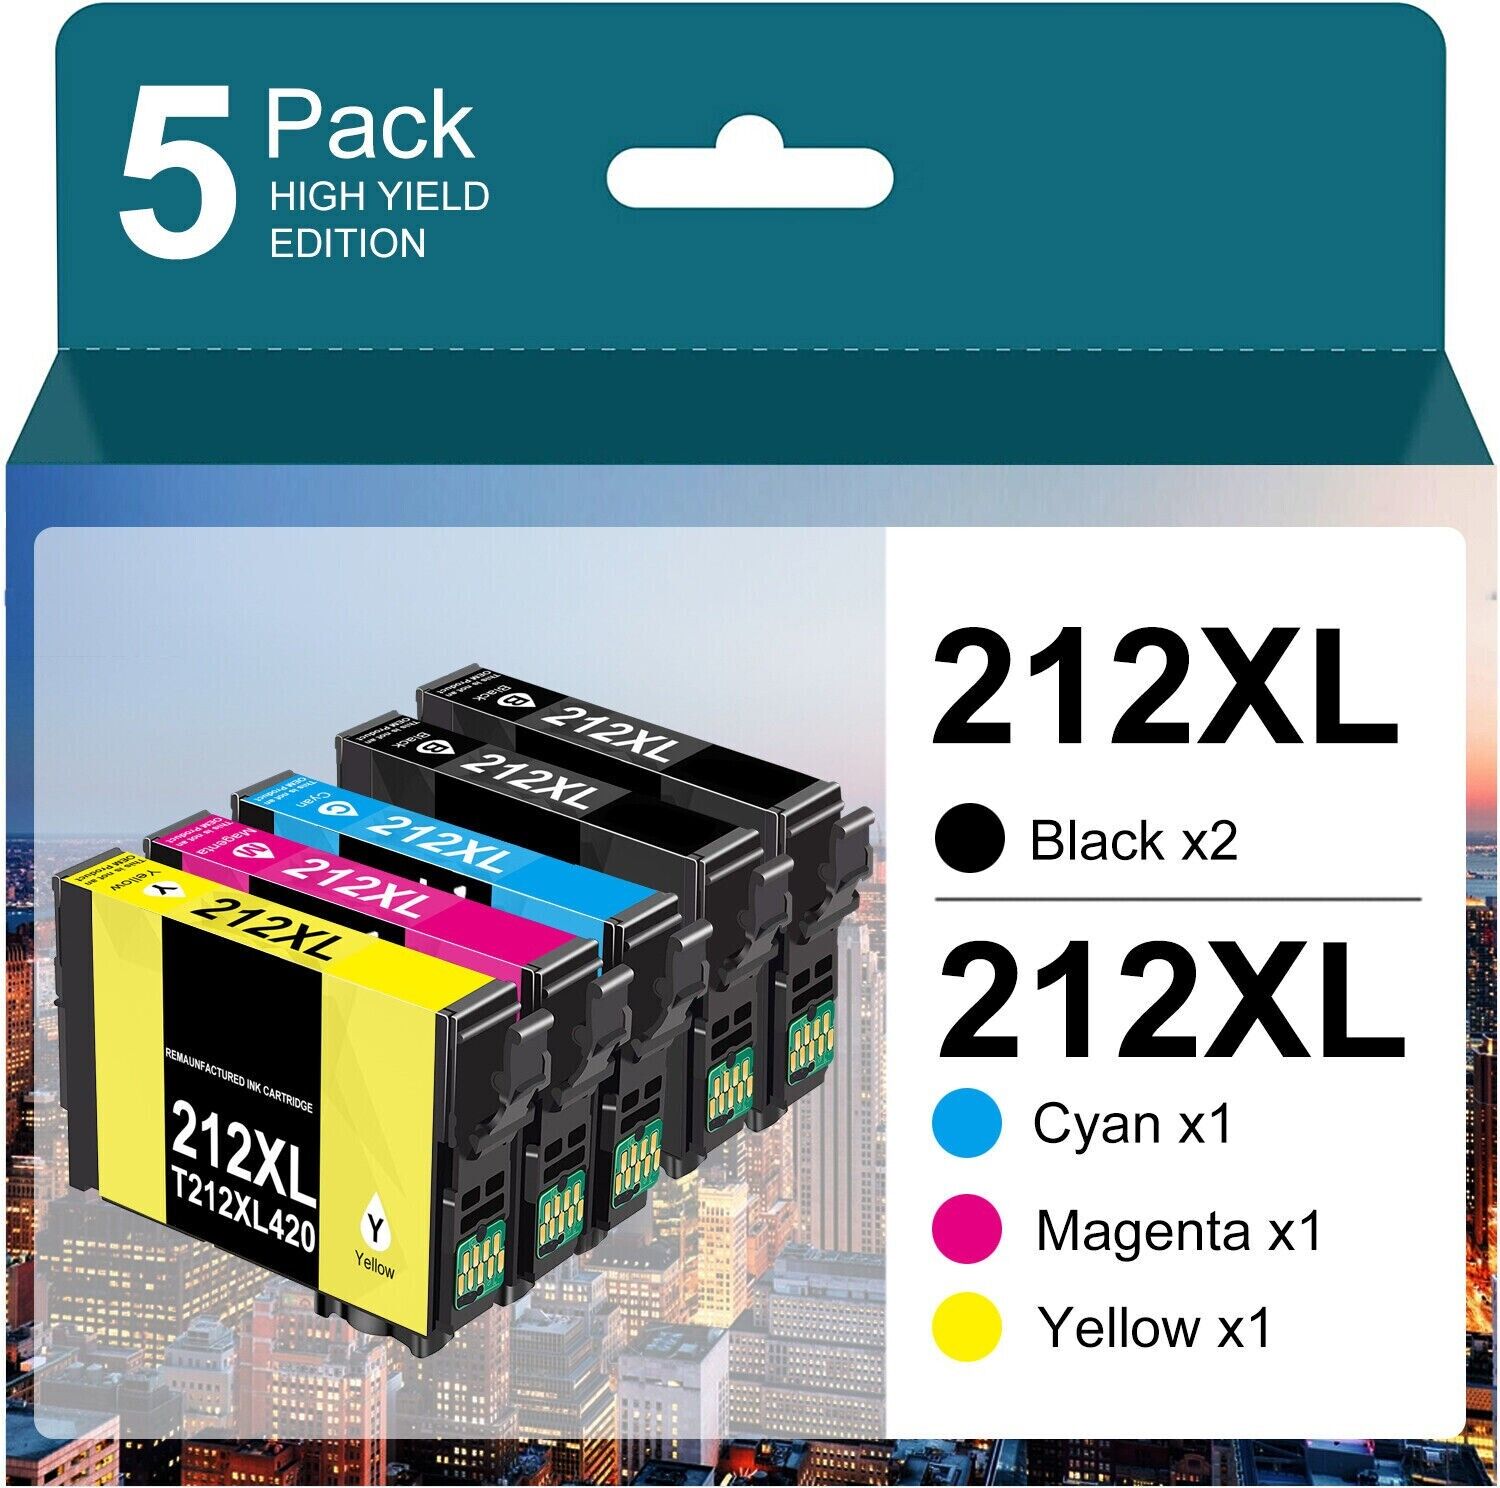 5 Pack T212XL 212 XL Replacement Ink Cartridge for XP-4105 XP-4100 WF-2830